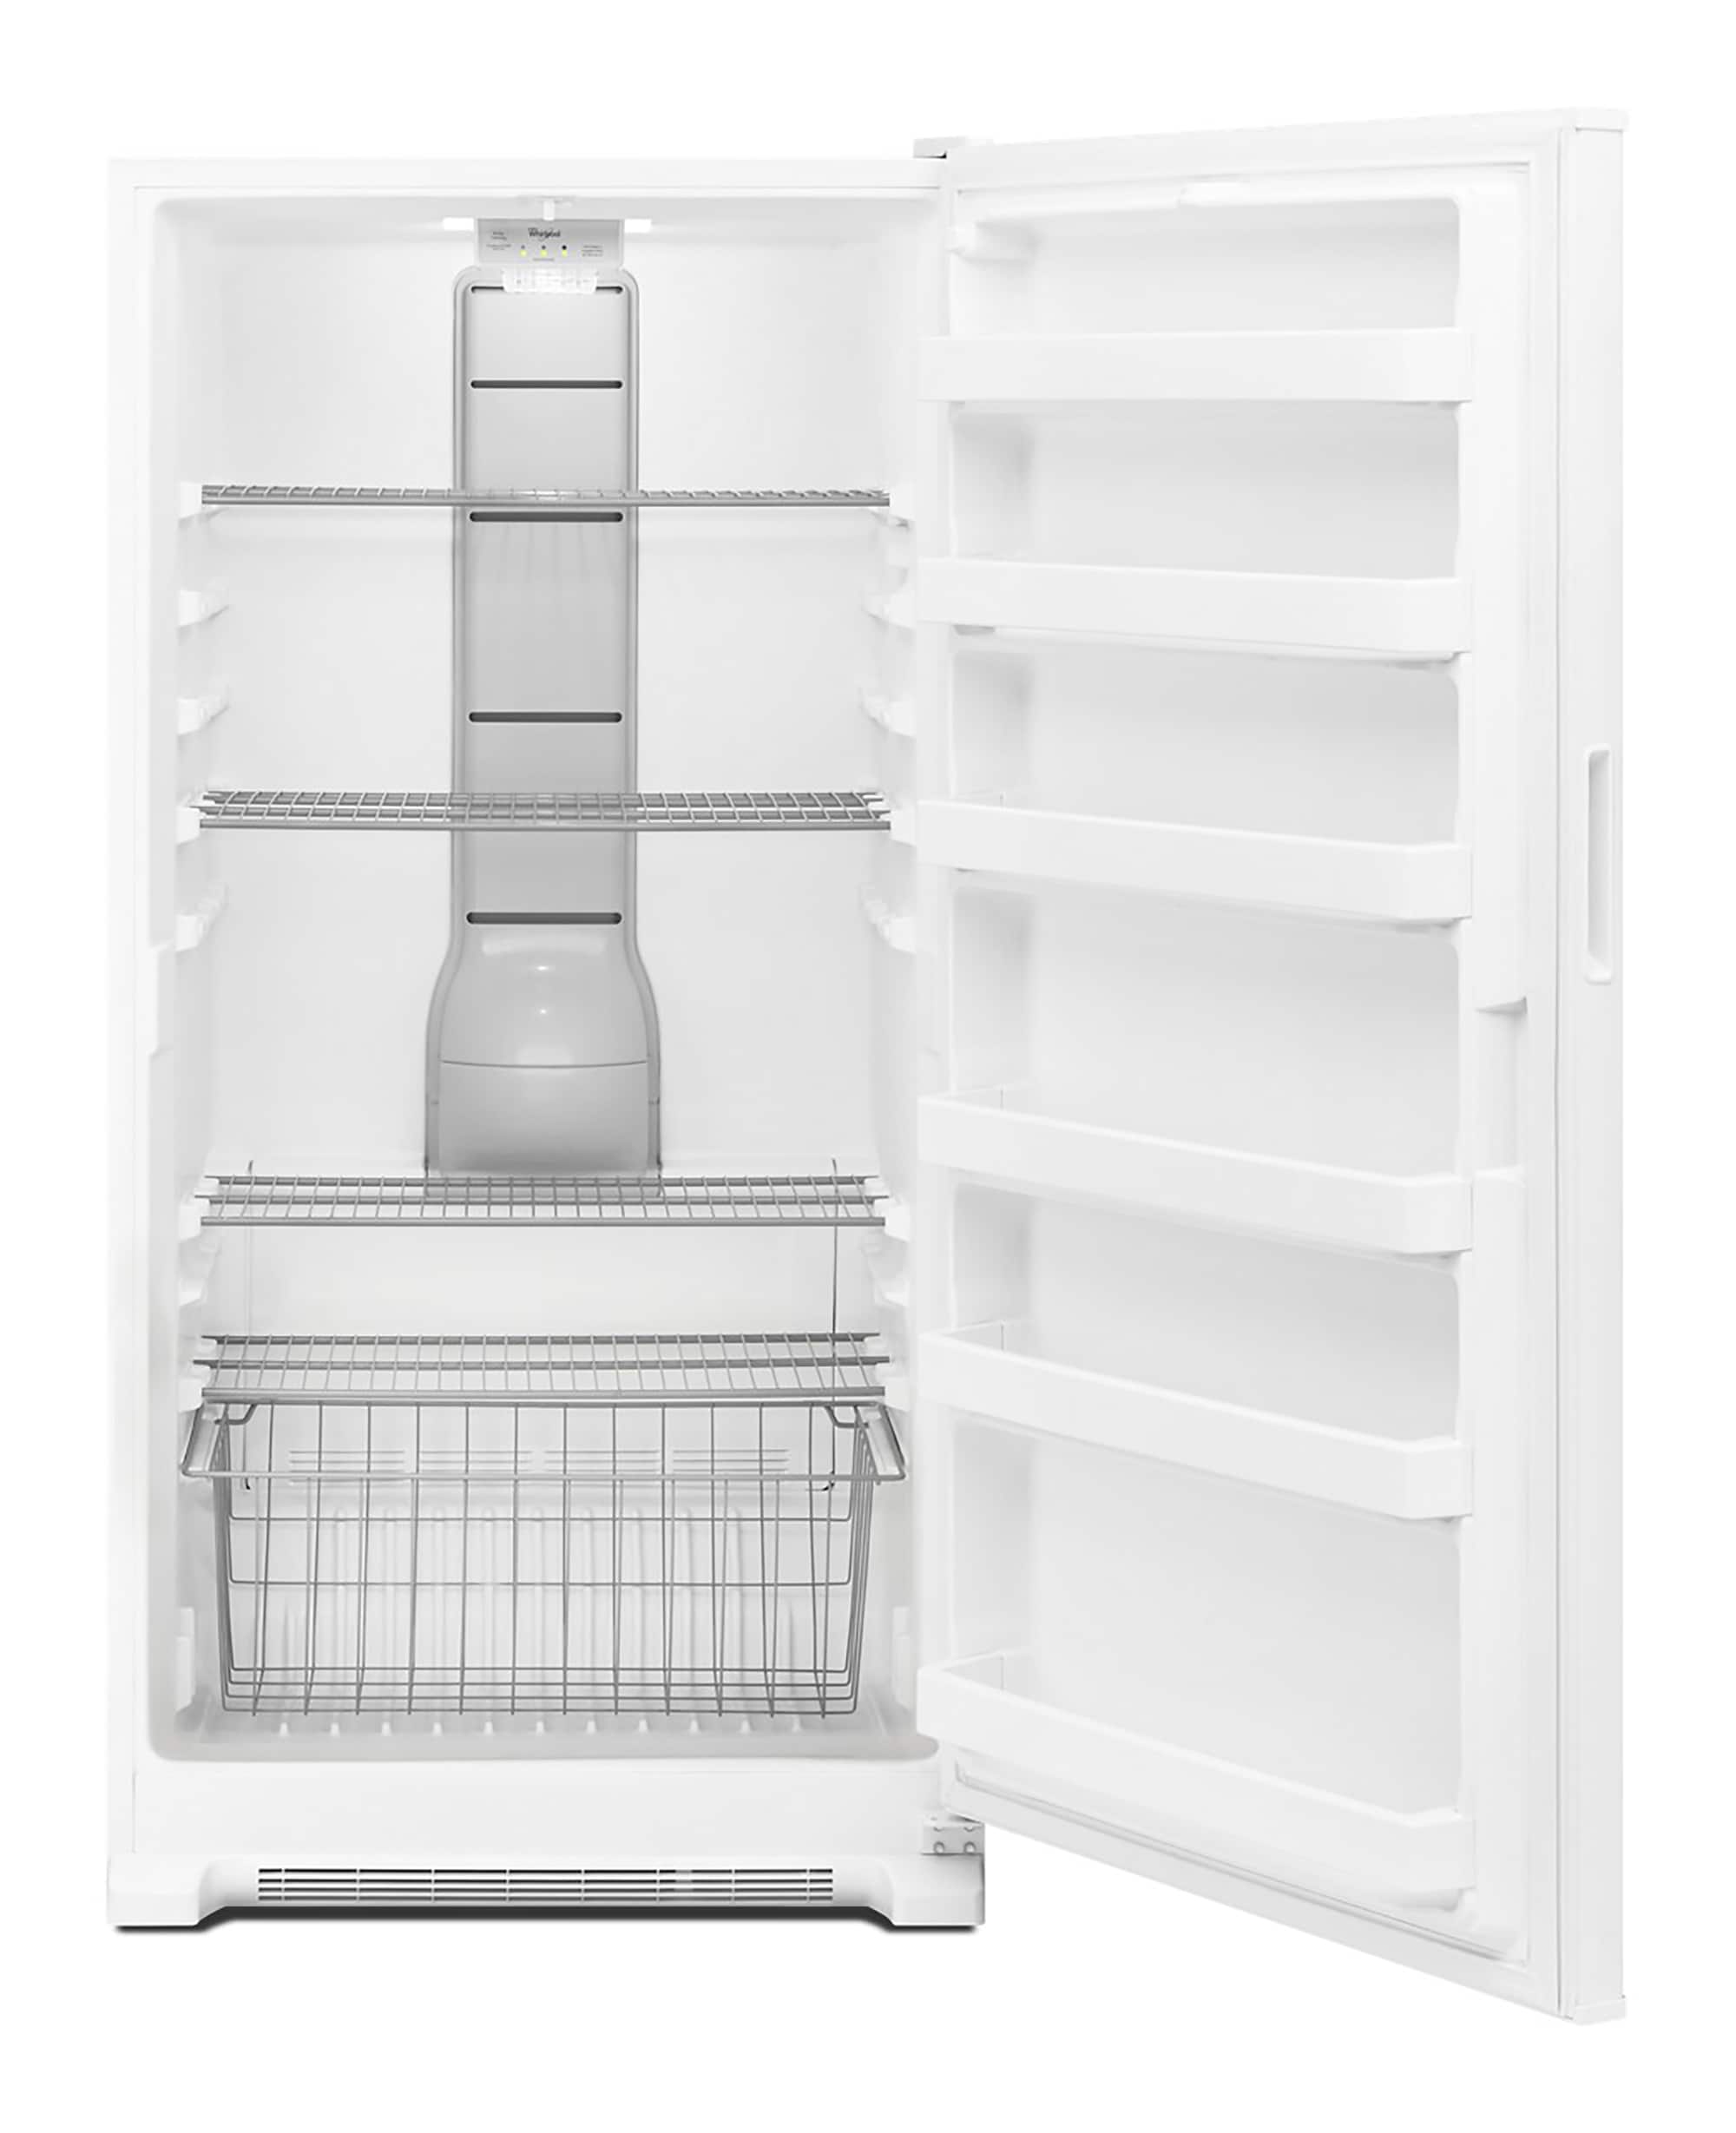 MSRP $1169 Whirlpool 20 cu.ft. Upright Freezer - NEW NEVER USED $600! -  appliances - by owner - sale - craigslist